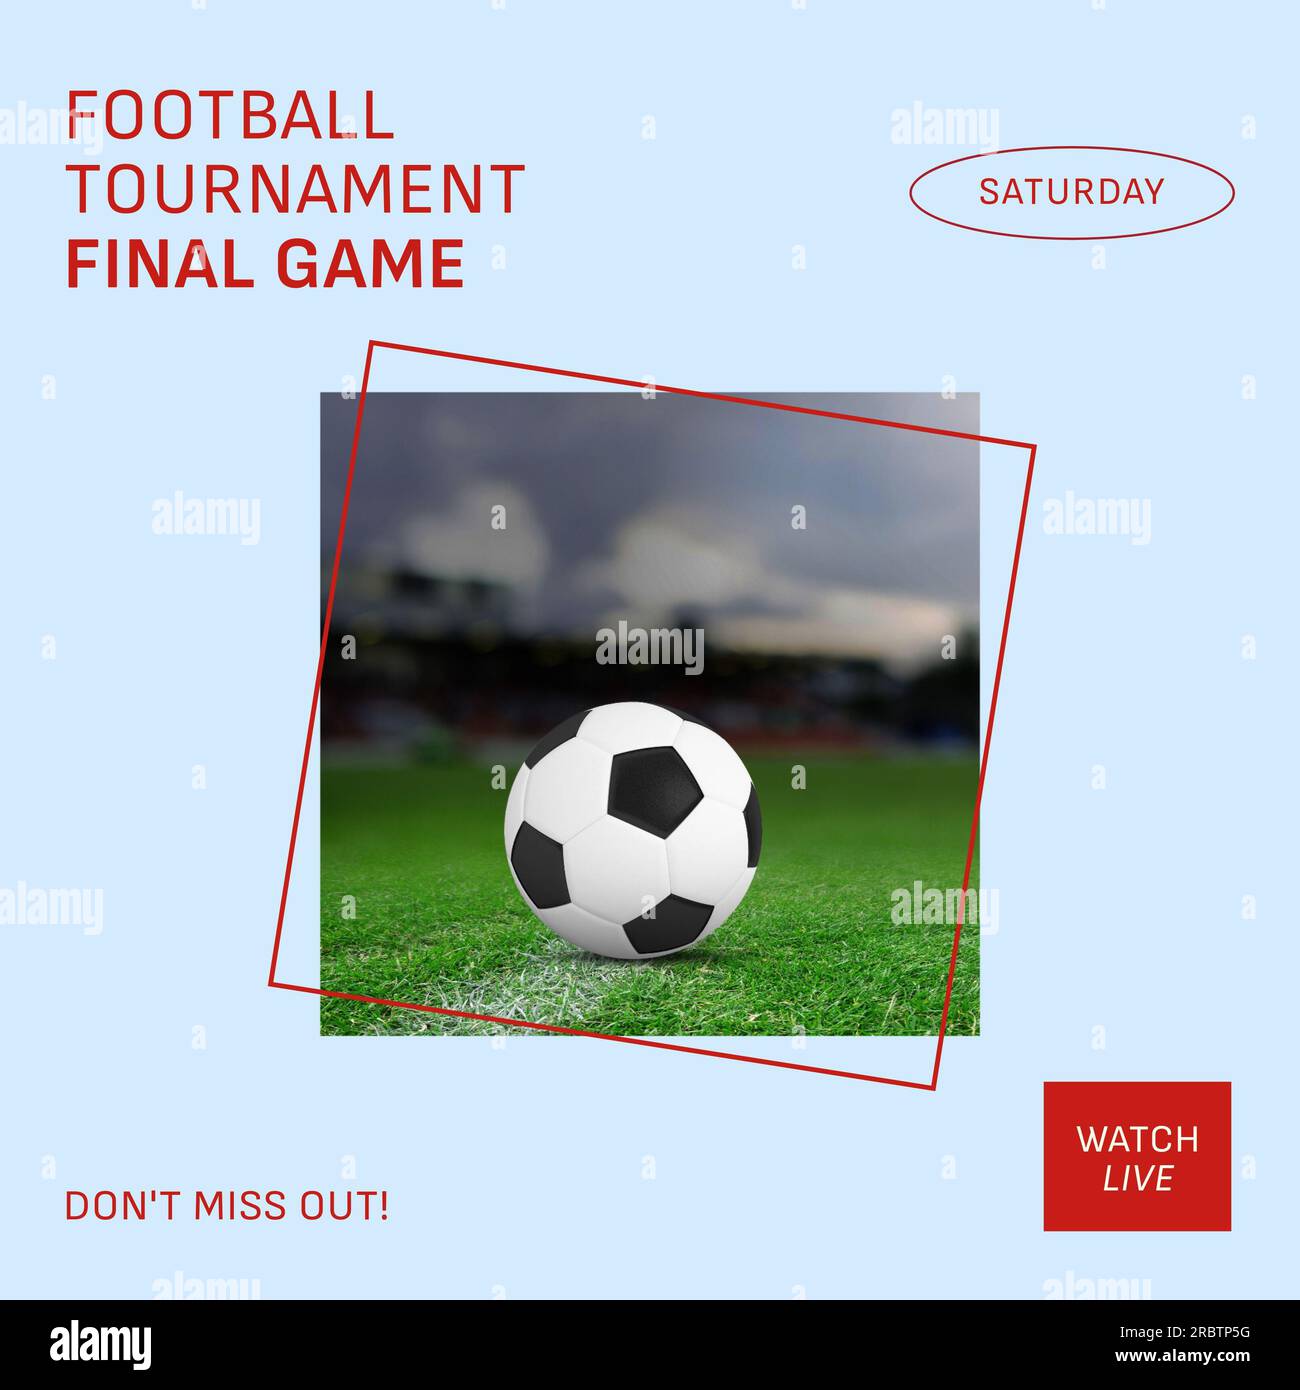 Football tournament final game text with football on pitch, on blue background Stock Photo